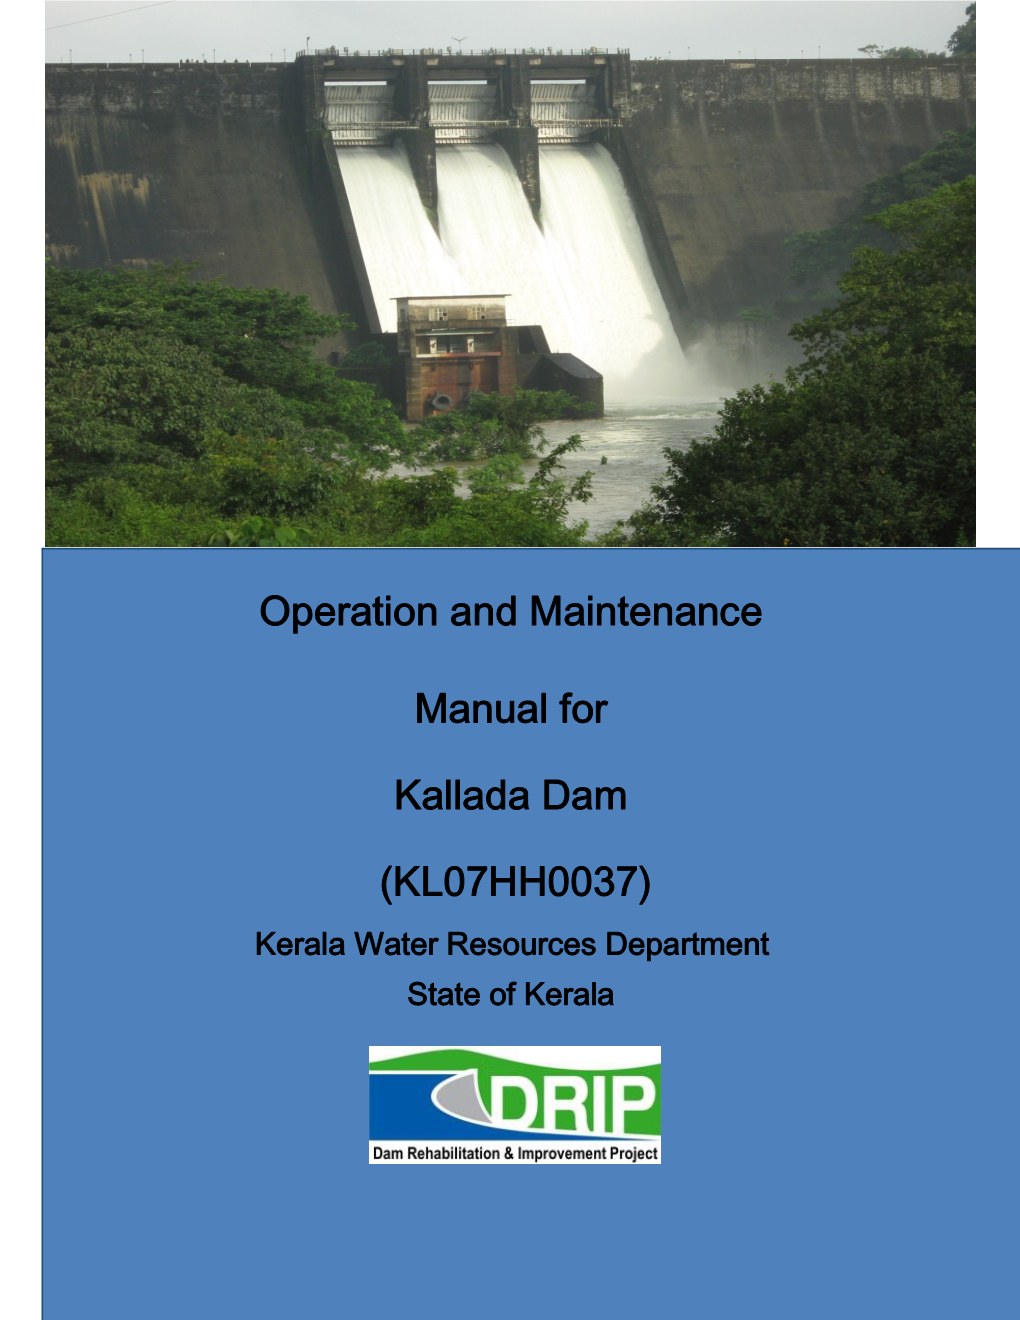 Operation and Maintenance Manual for Kallada Dam in No Way